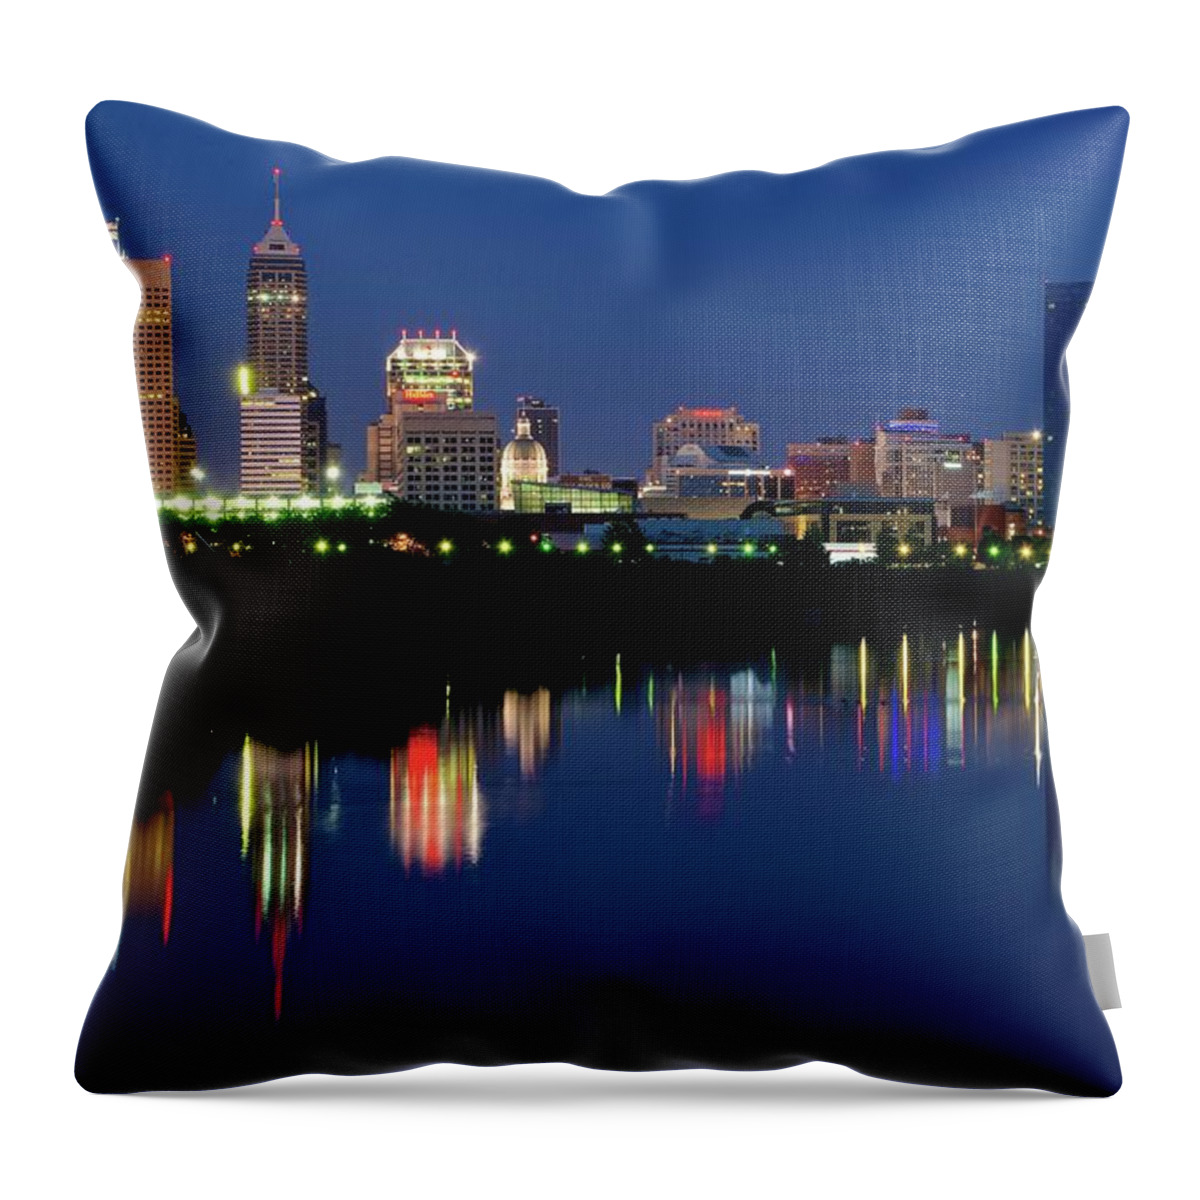 Indianapolis Throw Pillow featuring the photograph Indianapolis Night 2017 by Frozen in Time Fine Art Photography